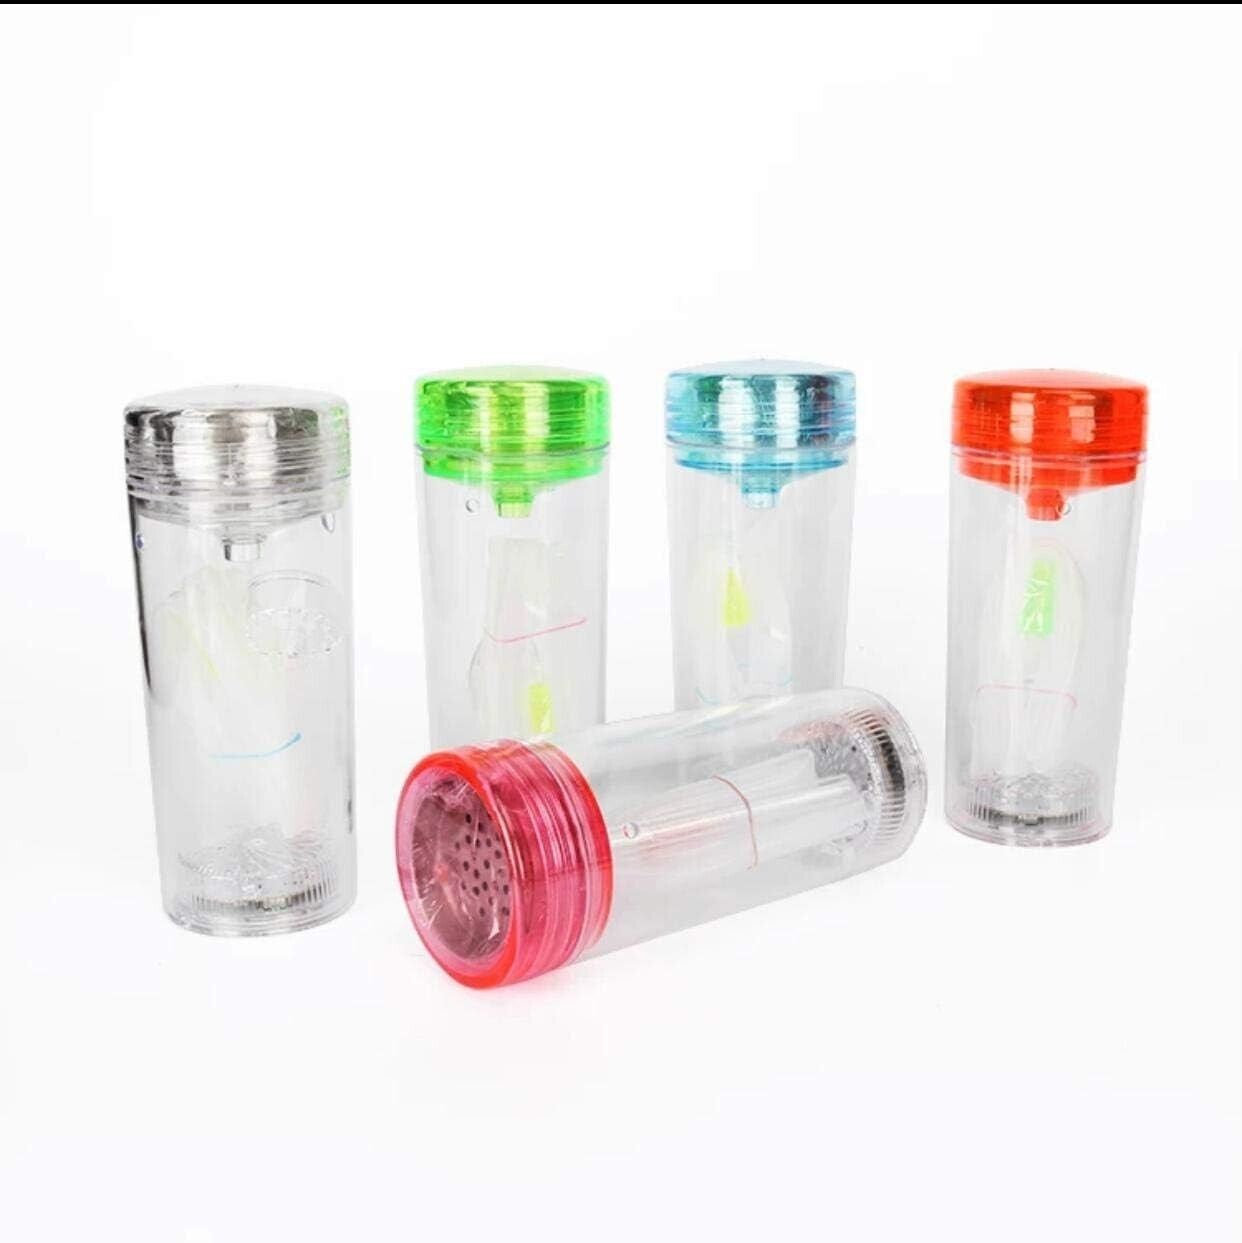 🤯 Portable Hookah Cup Set with LED, Multiple Colors Buy 2, Get 1 Free 🔥